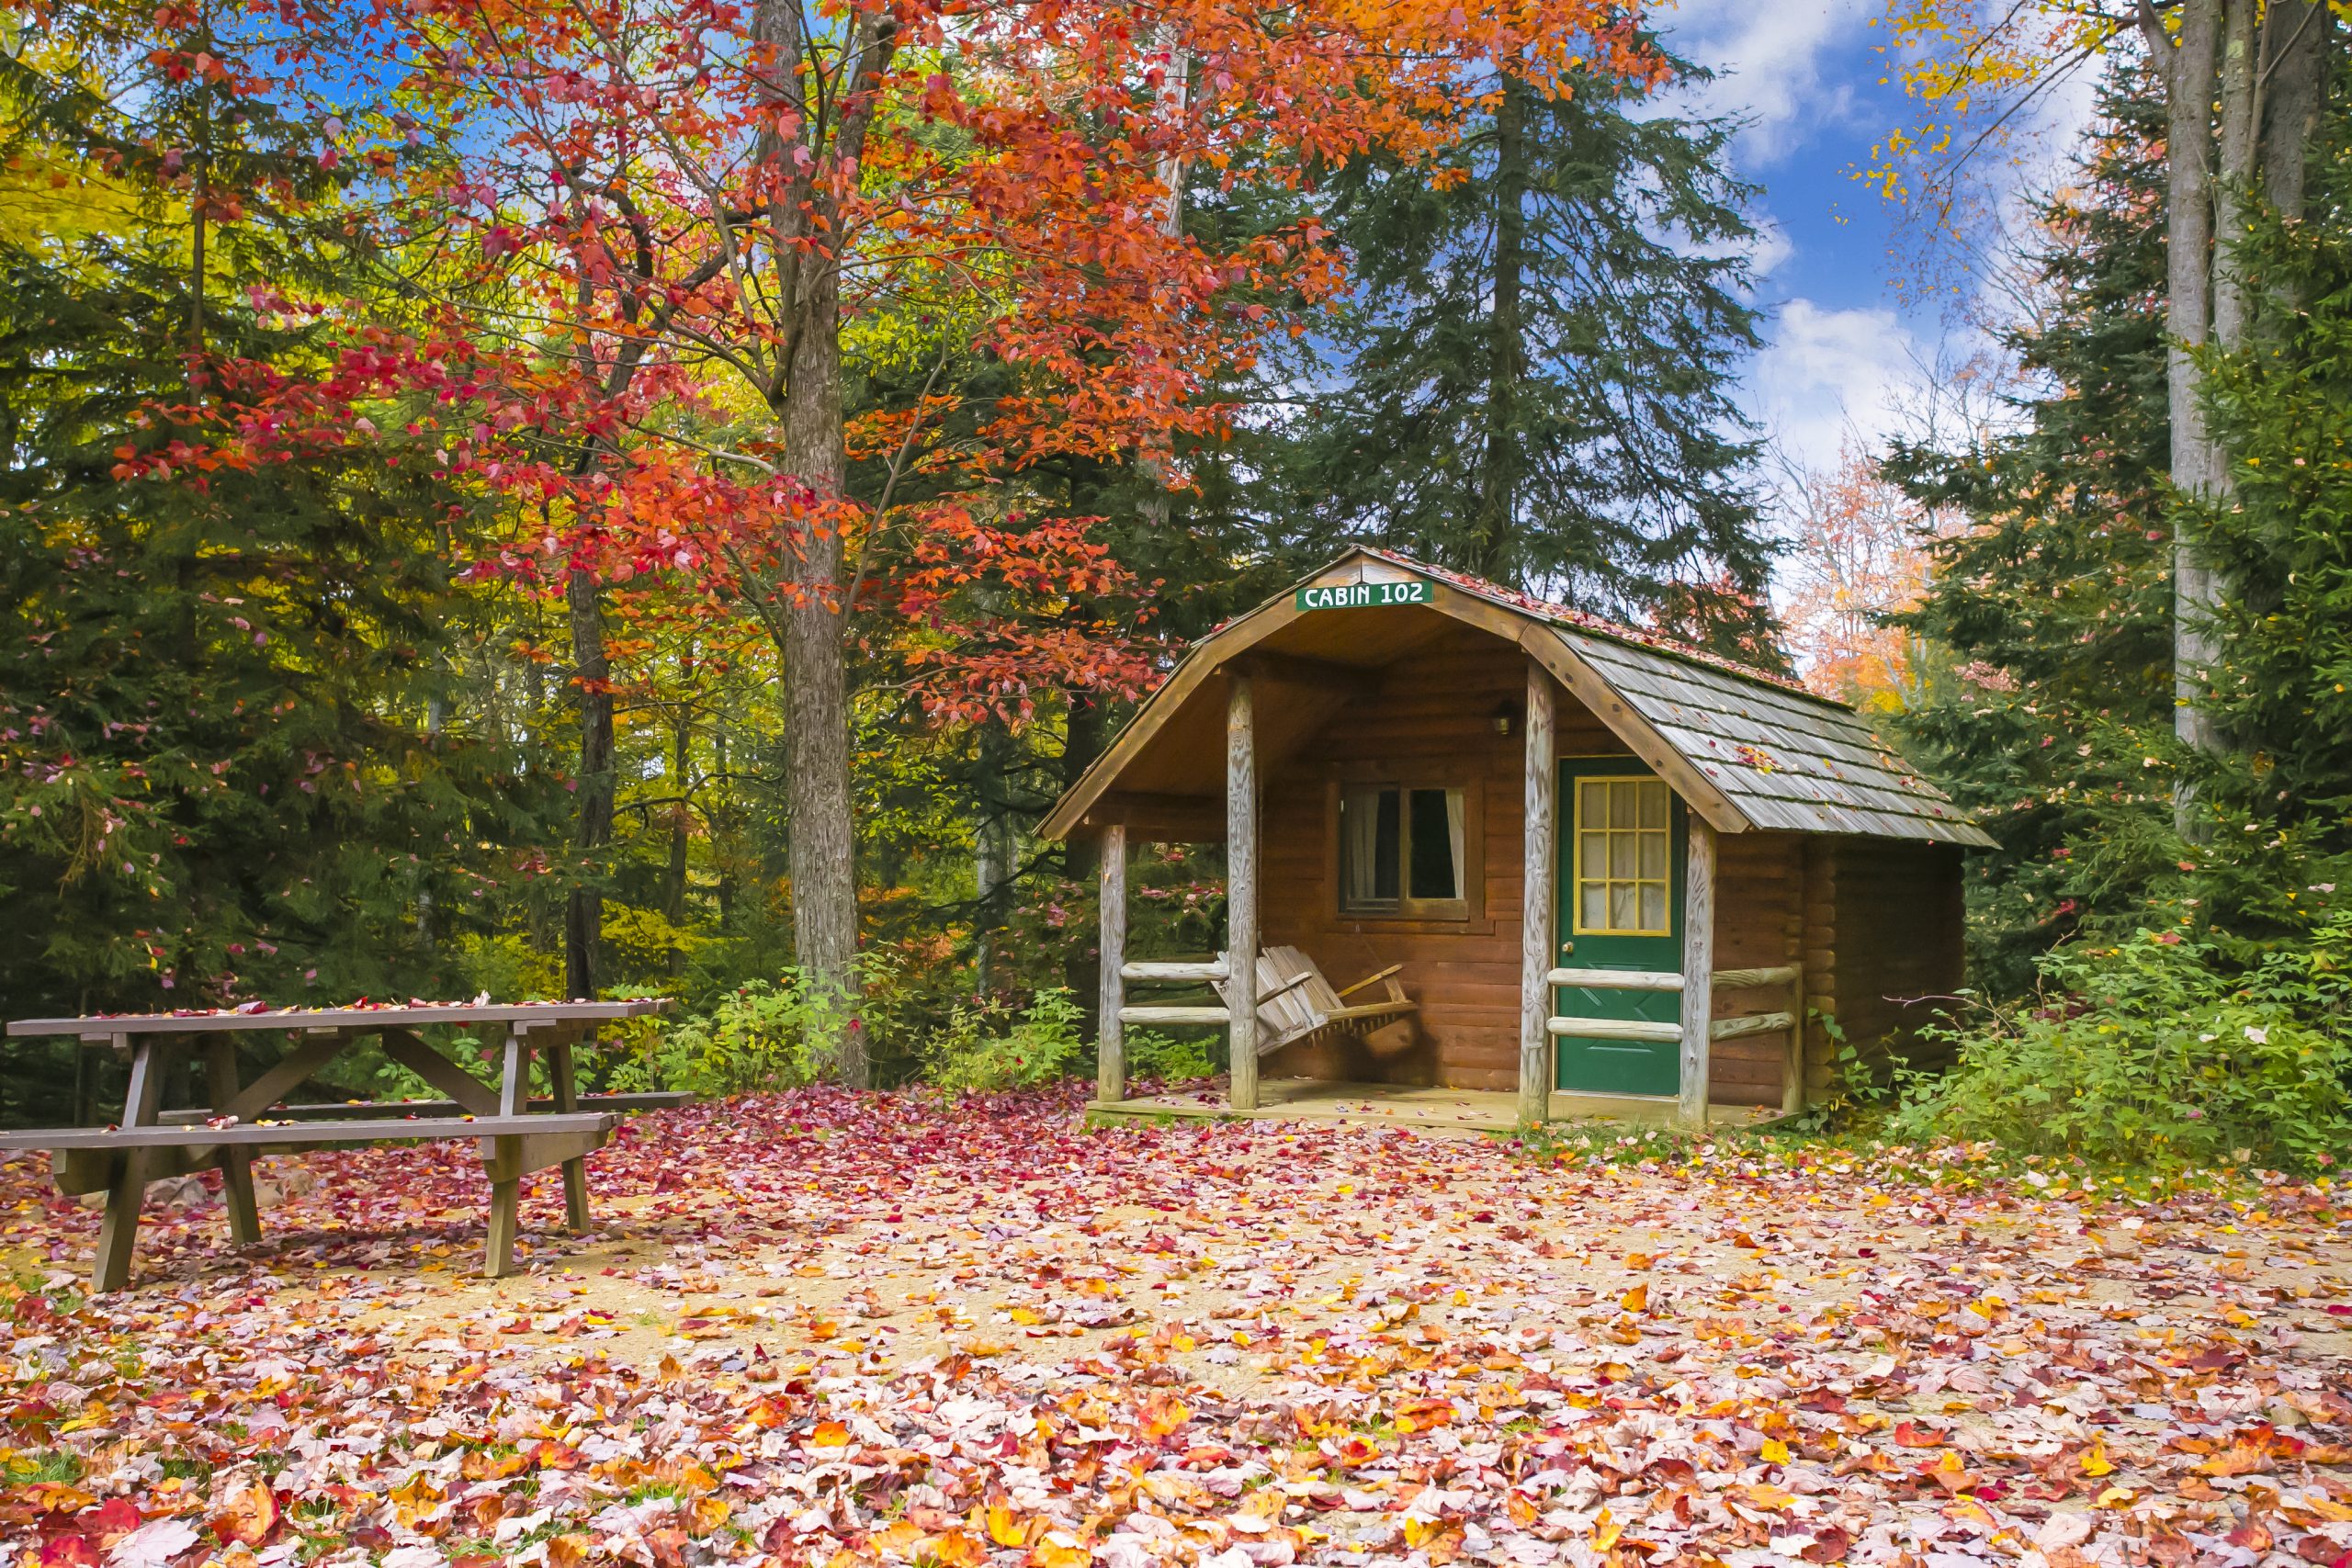 Photo of a cabin with a porch swing and picnic table, on a lovely fall day. The leaves are changing color and the ground is scattered with red and orange leafs.